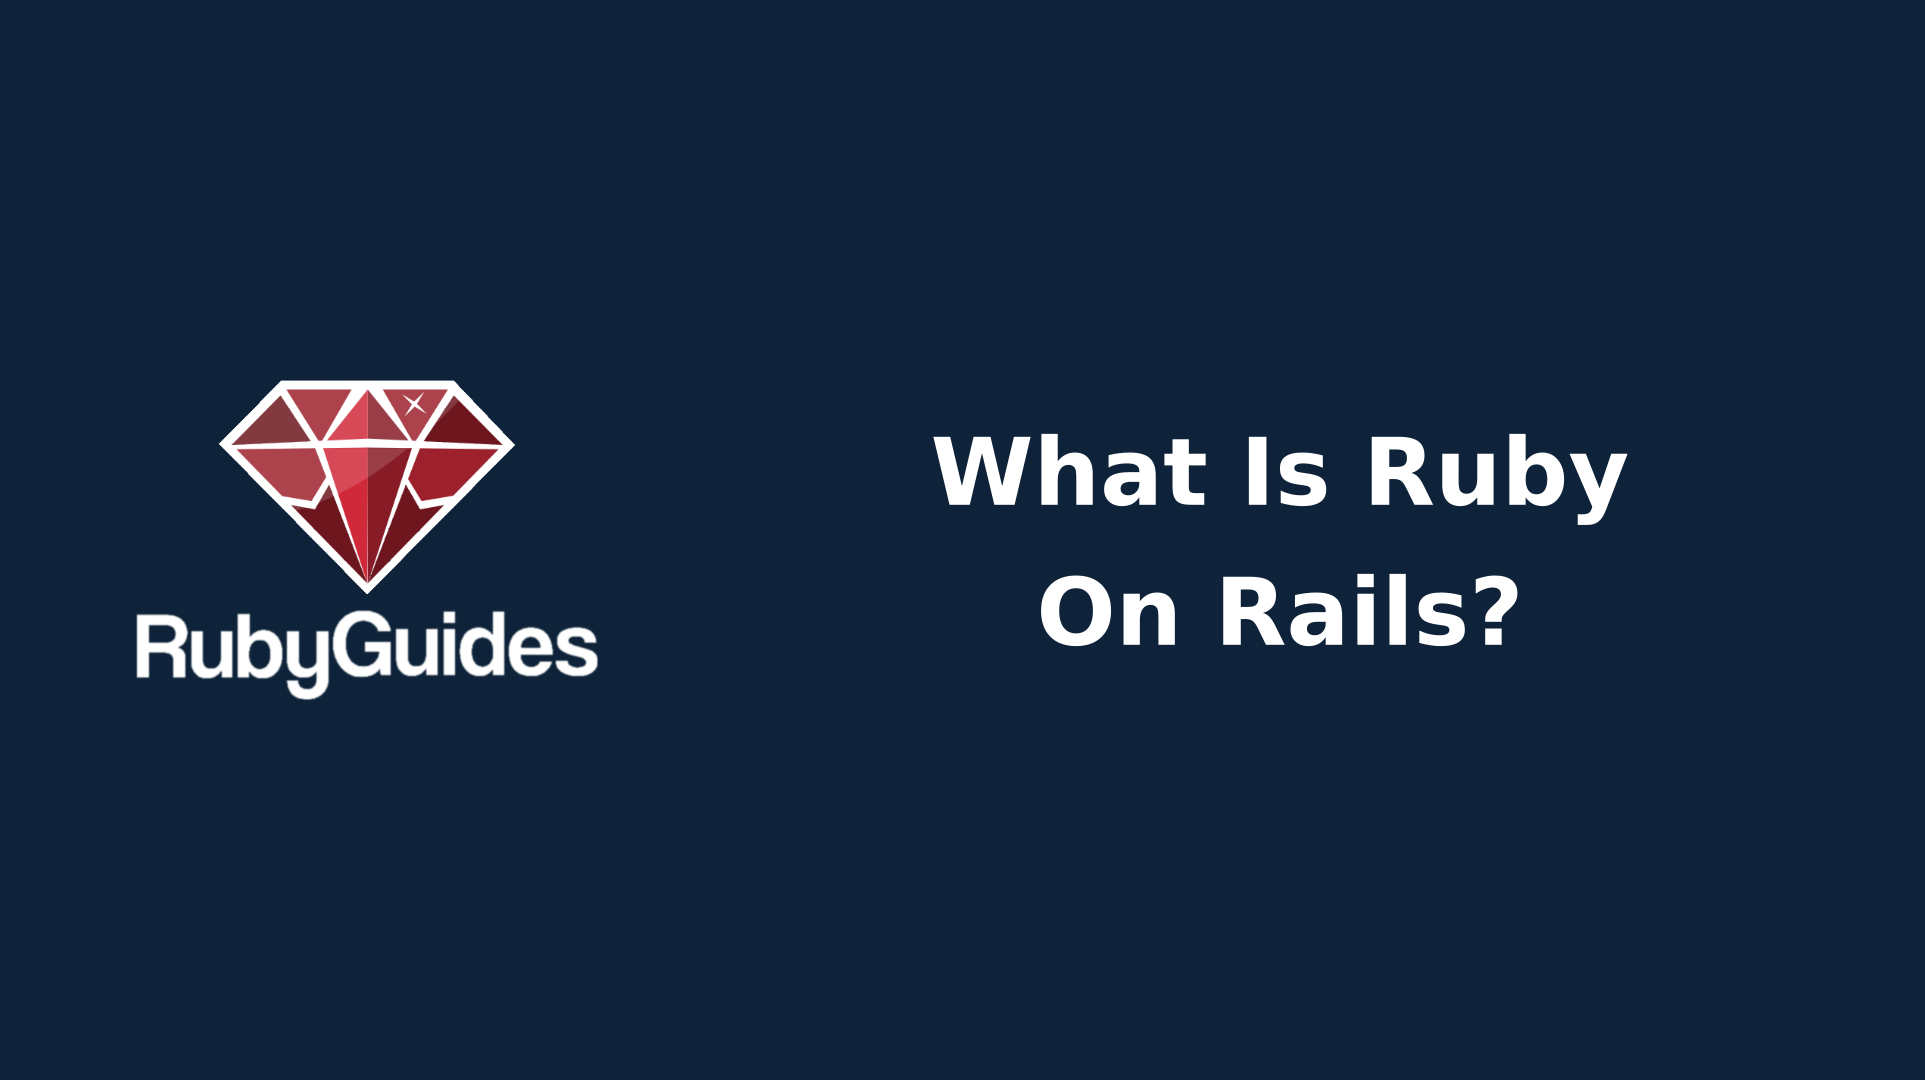 Ruby on rails code example